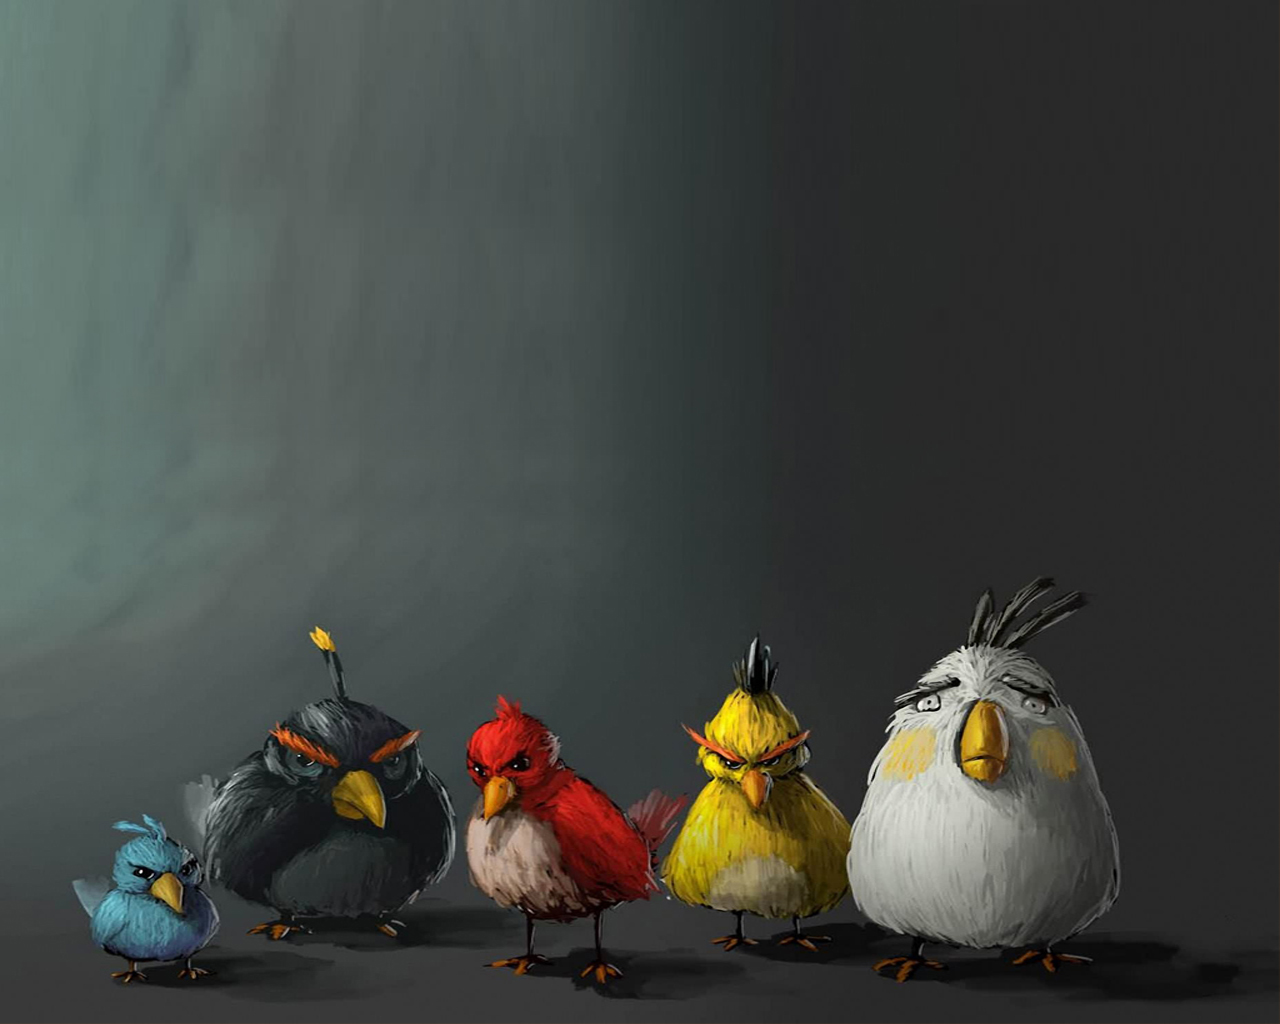 angry birds, video game